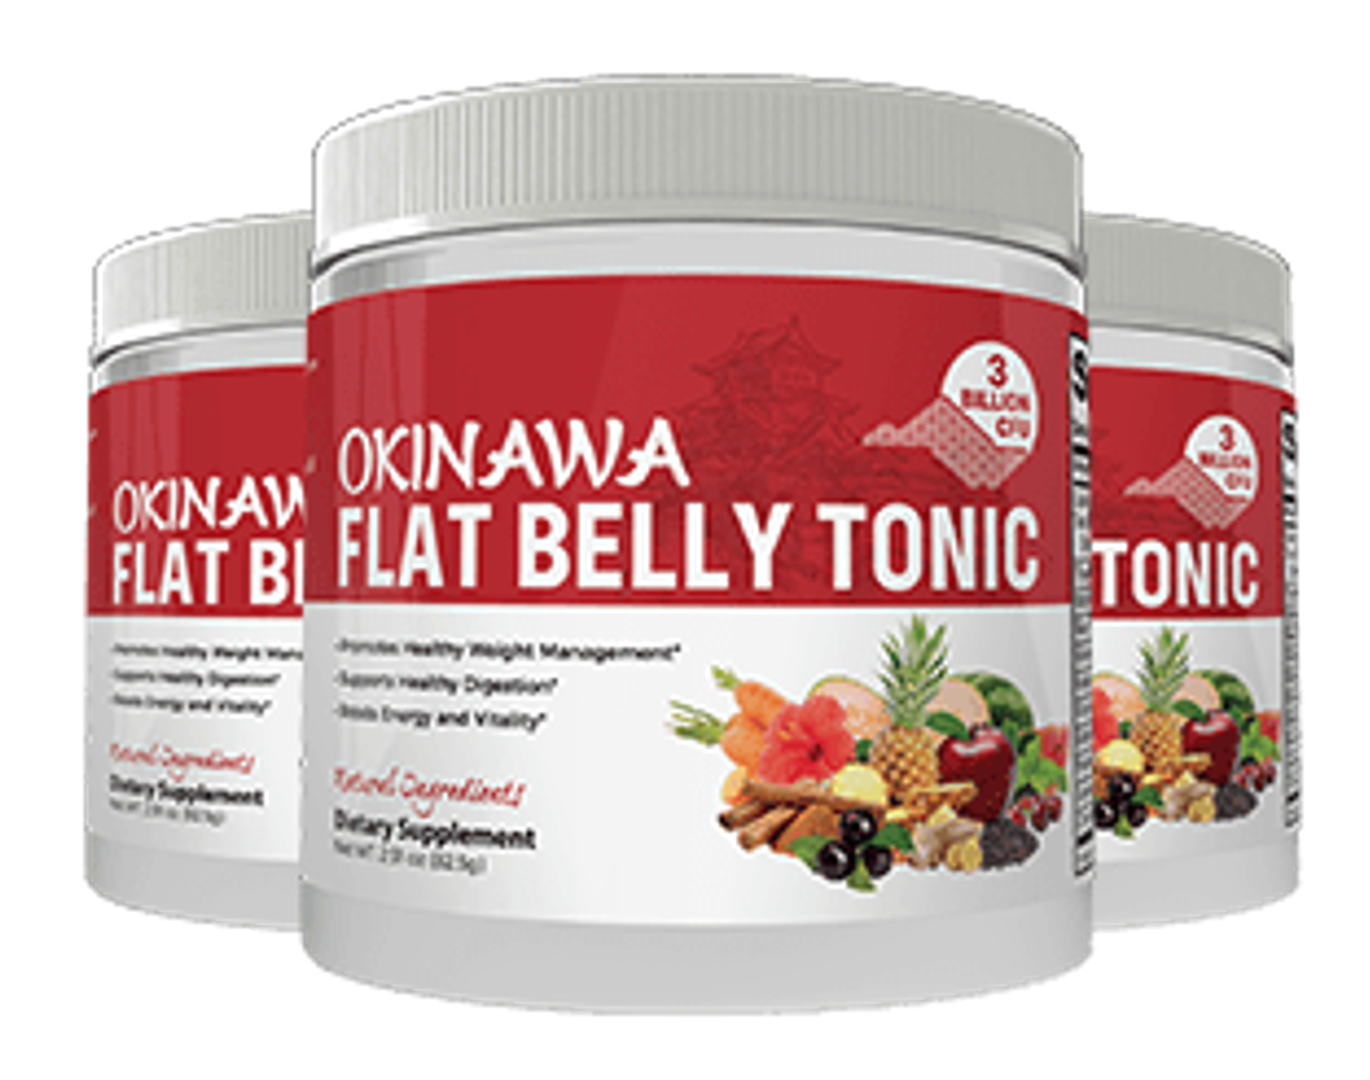 okinawa flat belly tonic phone number